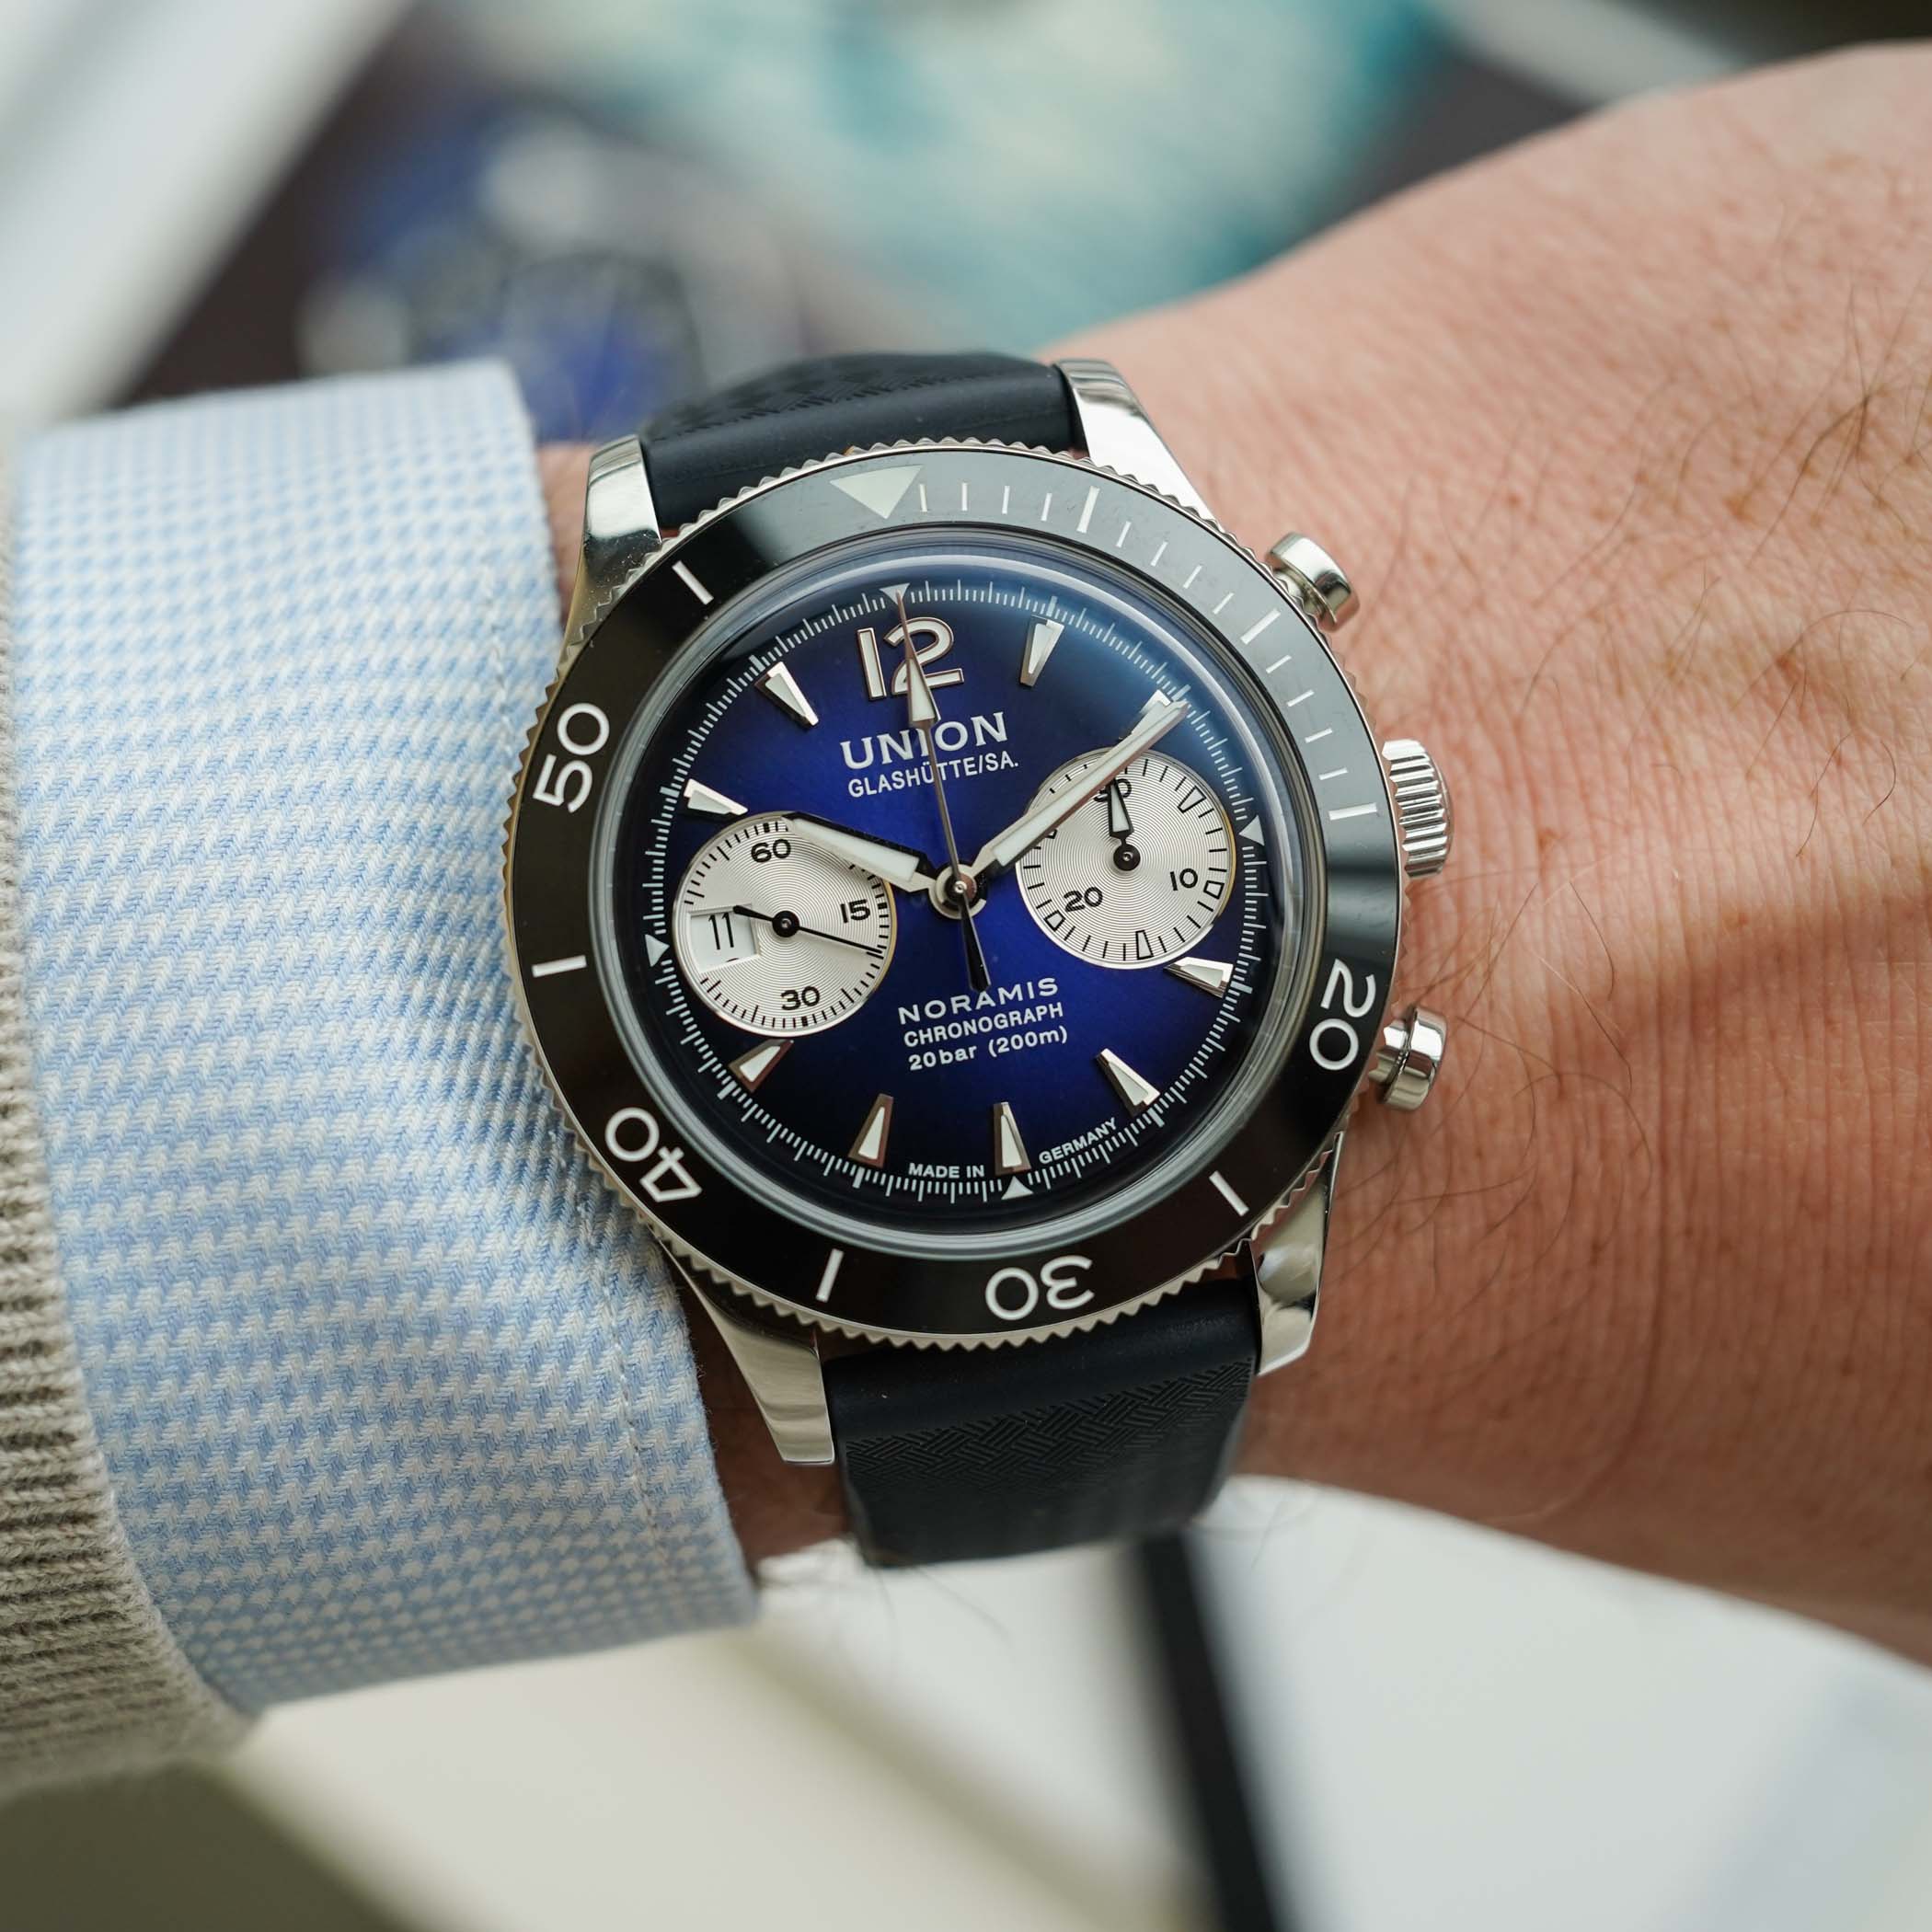 Union Glashutte Noramis Chronograph Sport - diving chronograph - hands-on - 3